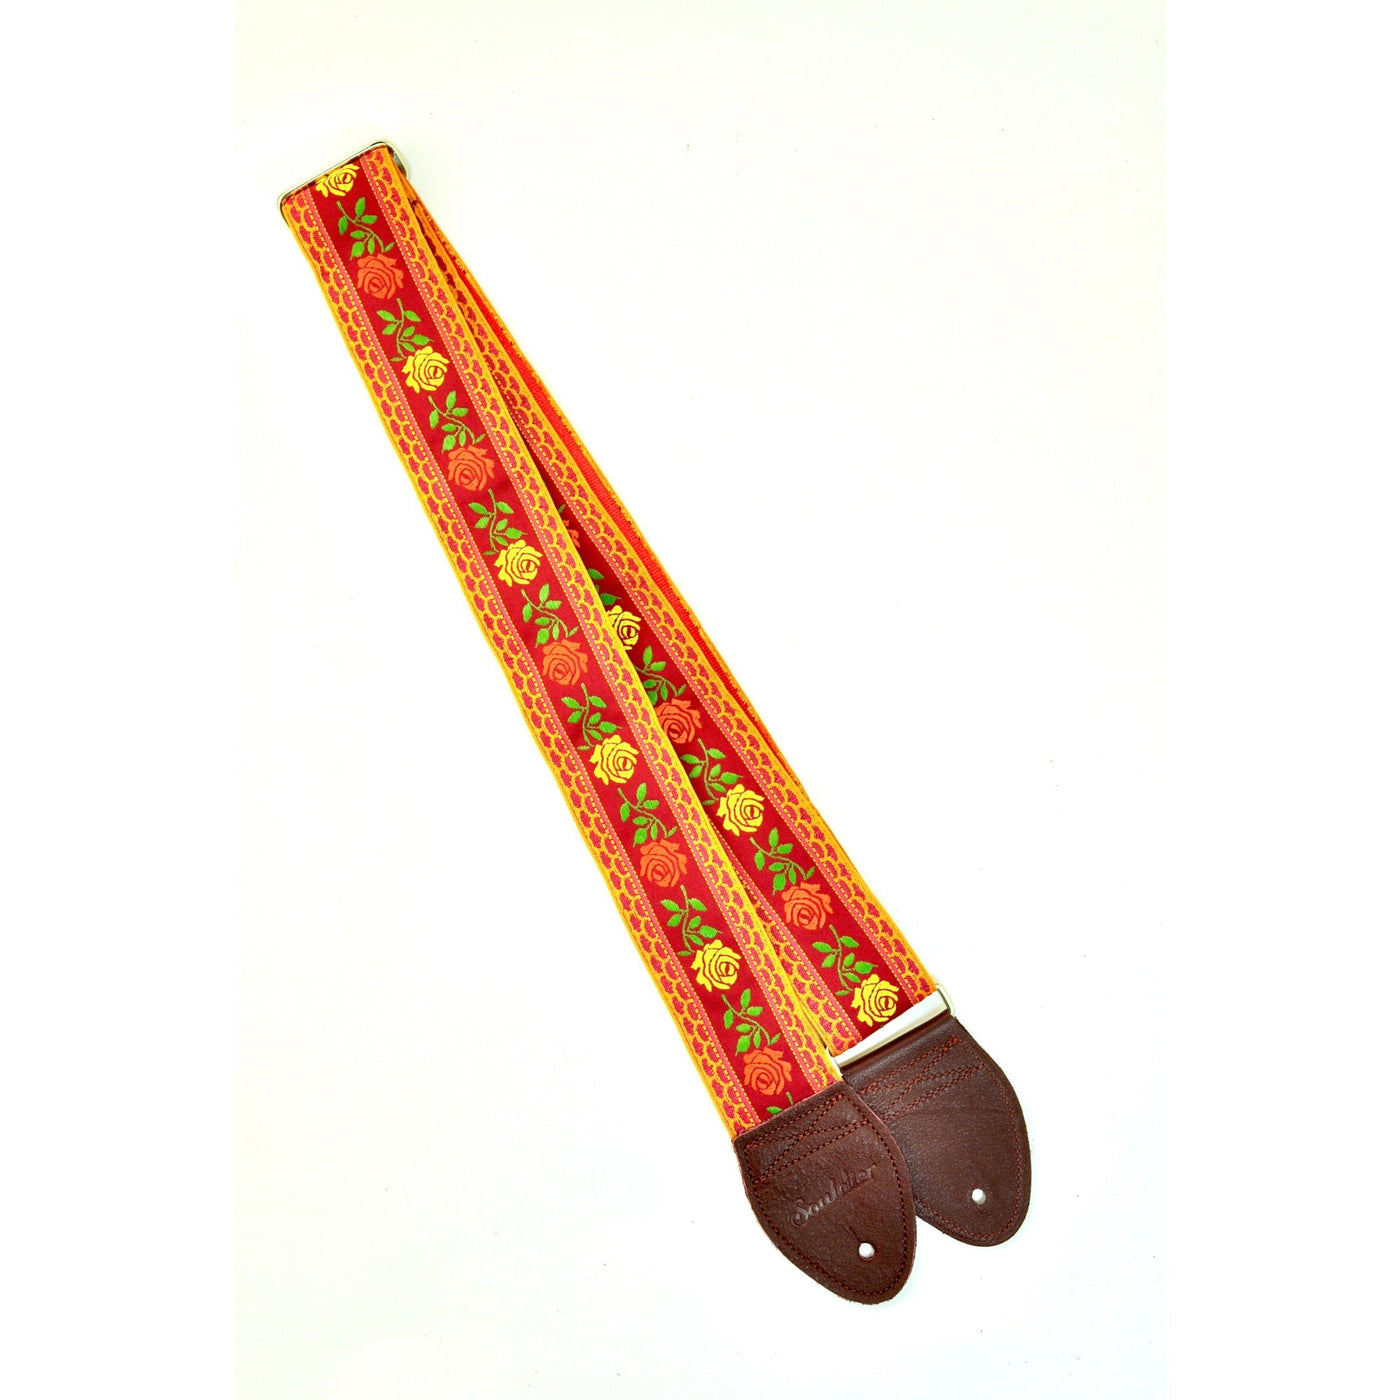 Souldier GS1000RD02BD - Handmade Seatbelt Guitar Strap for Bass, Electric or Acoustic Guitar, 2 Inches Wide and Adjustable Length from 30" to 63"  Made in the USA, Tuscan Rose